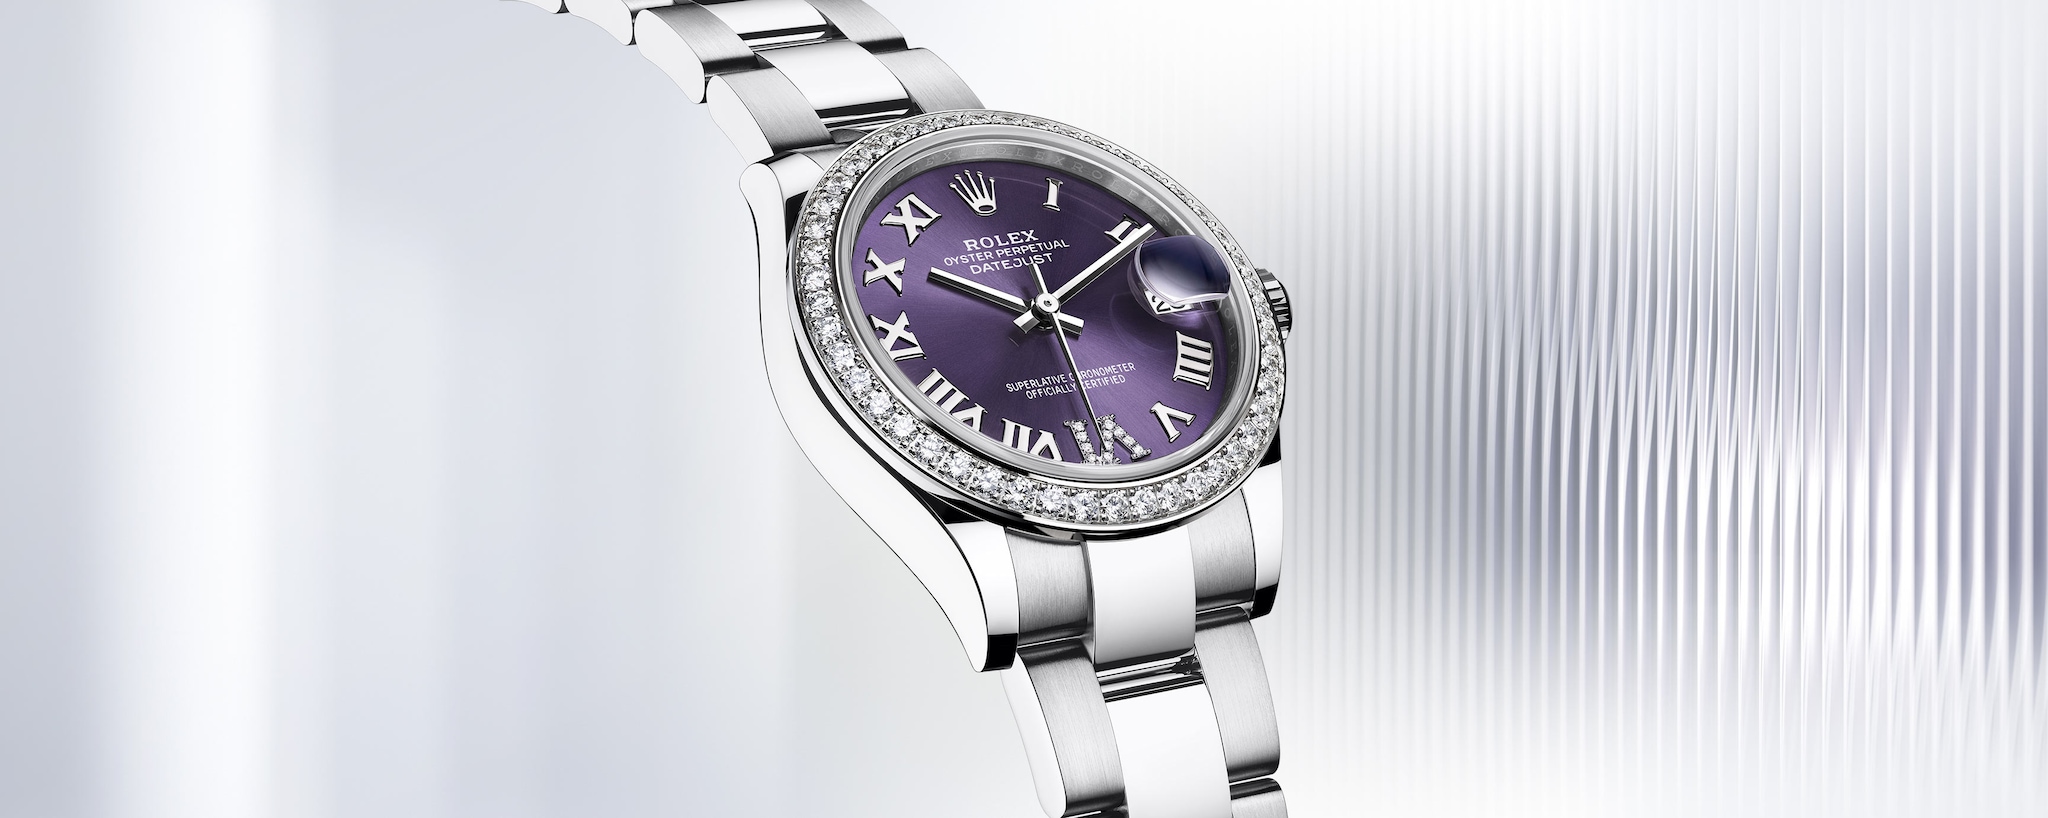 Datejust - The classic watch of 